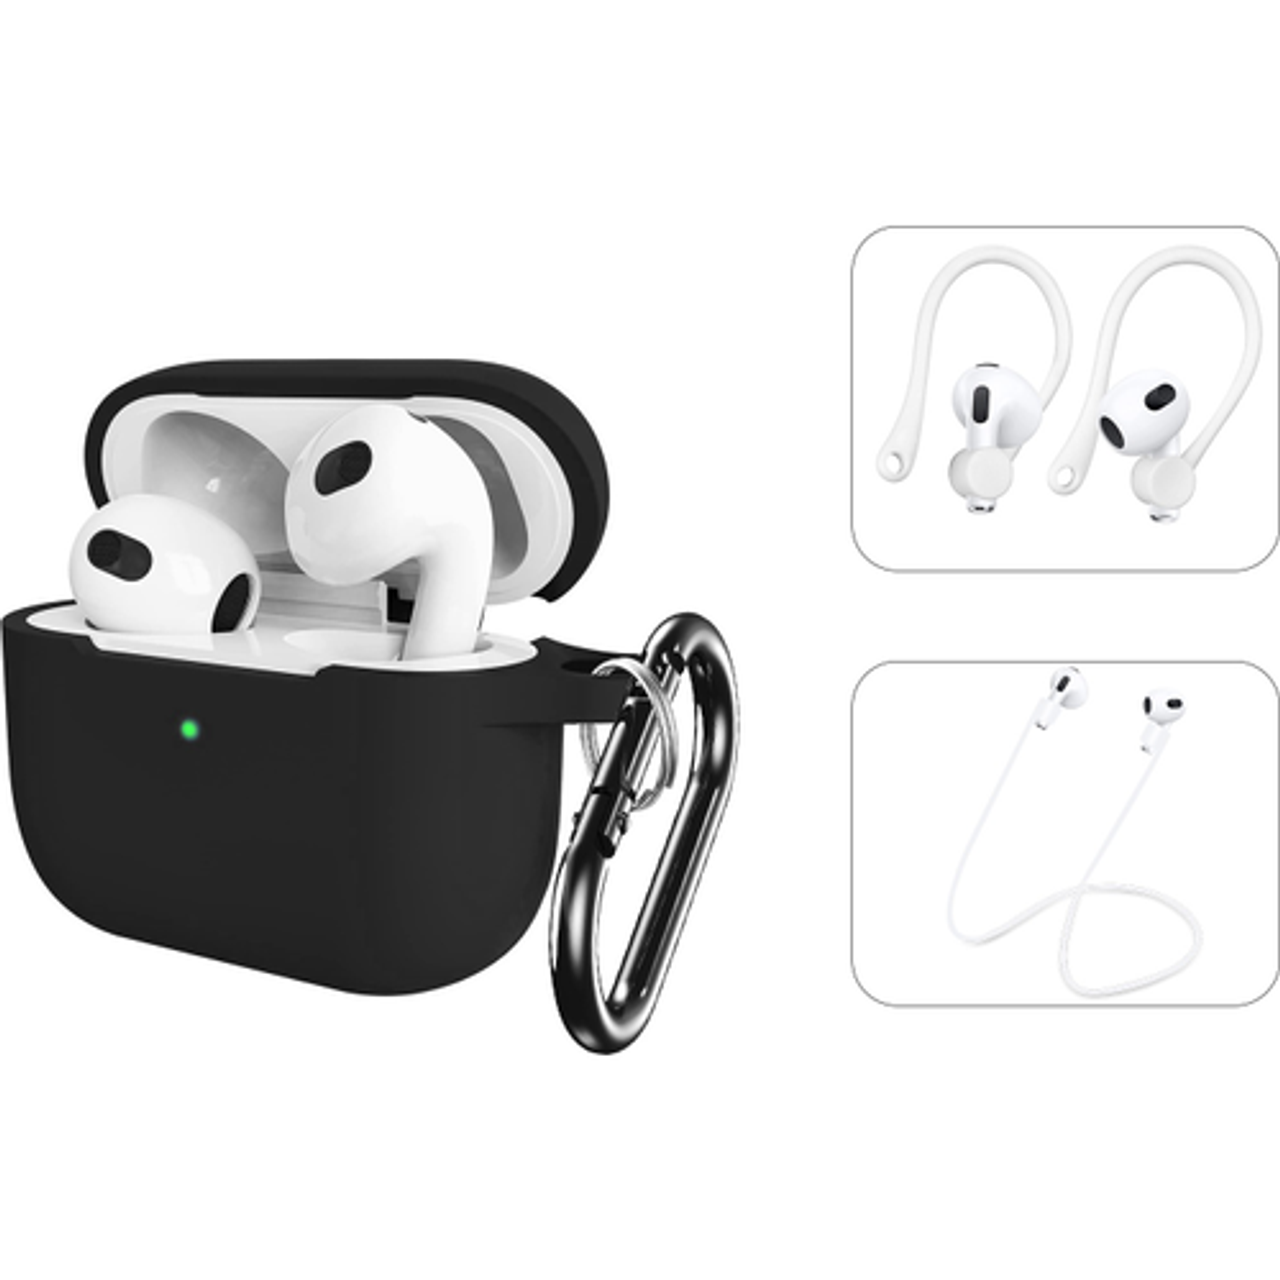 SaharaCase - Venture Series Silicone Combo Kit Case for Apple AirPods (3rd Generation) - Black